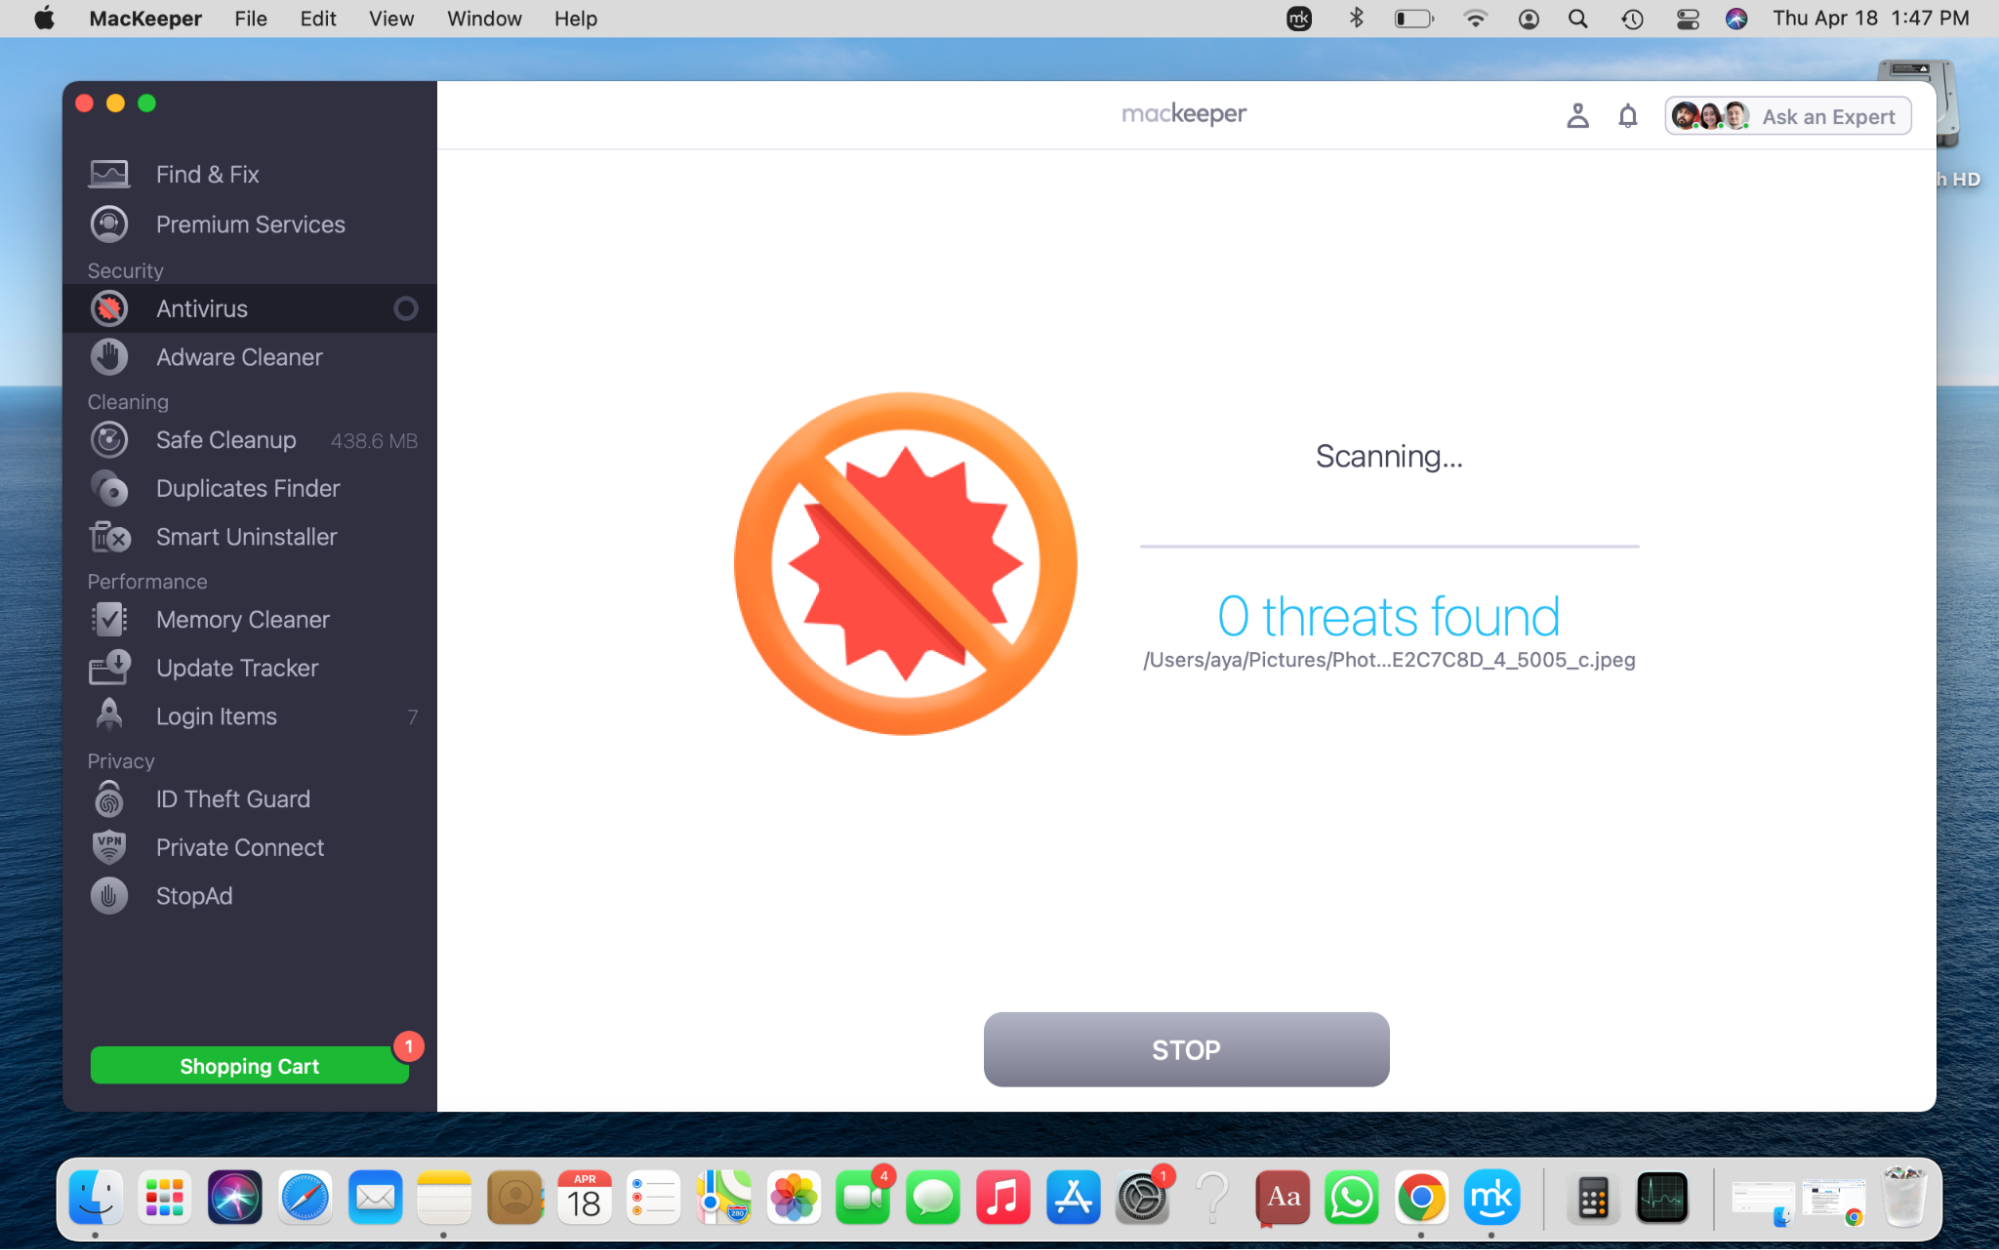 To remove CoinMiner malware automatically, follow the progress of the MacKeeper Antivirus scan on the screen. If MacKeeper finds CoinMiner malware on your Mac, remove it by selecting Move Quarantine > Delete.